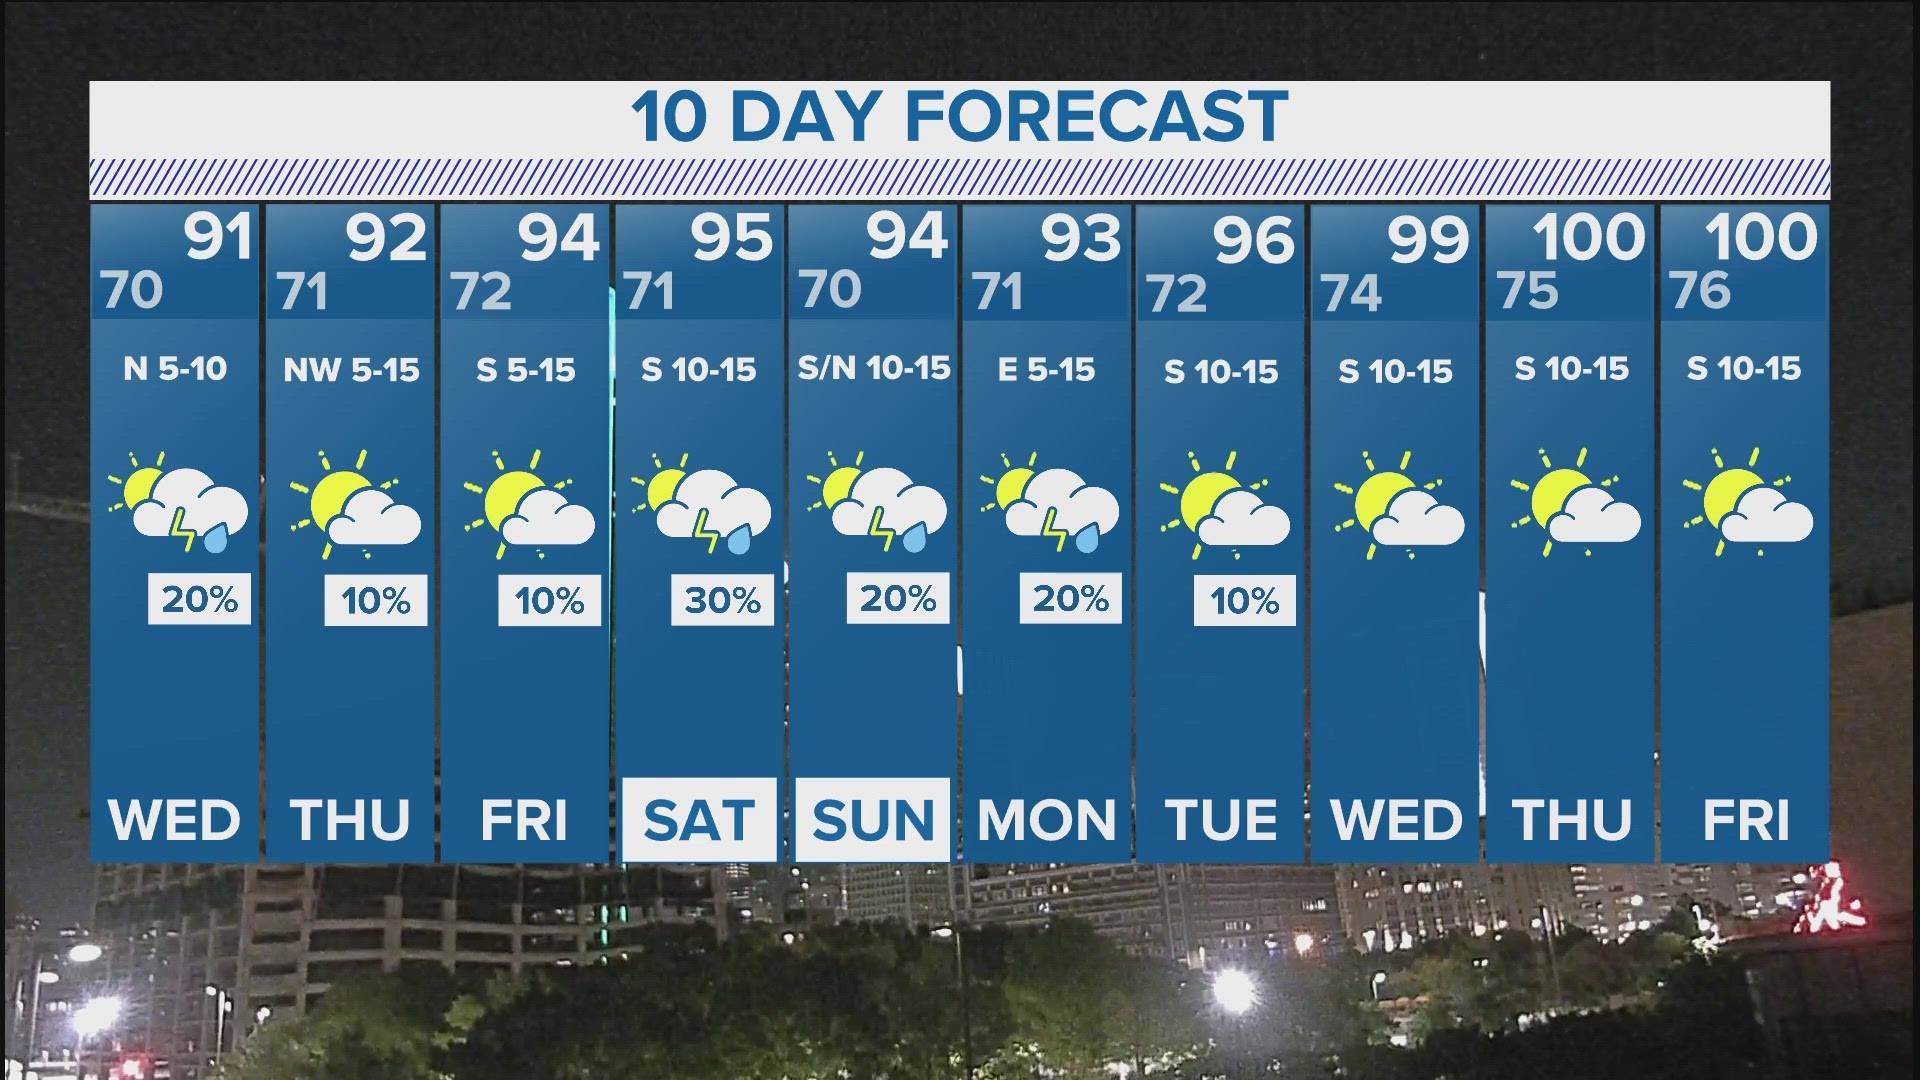 Slight rain chances through the week as temperatures continue to warm up.